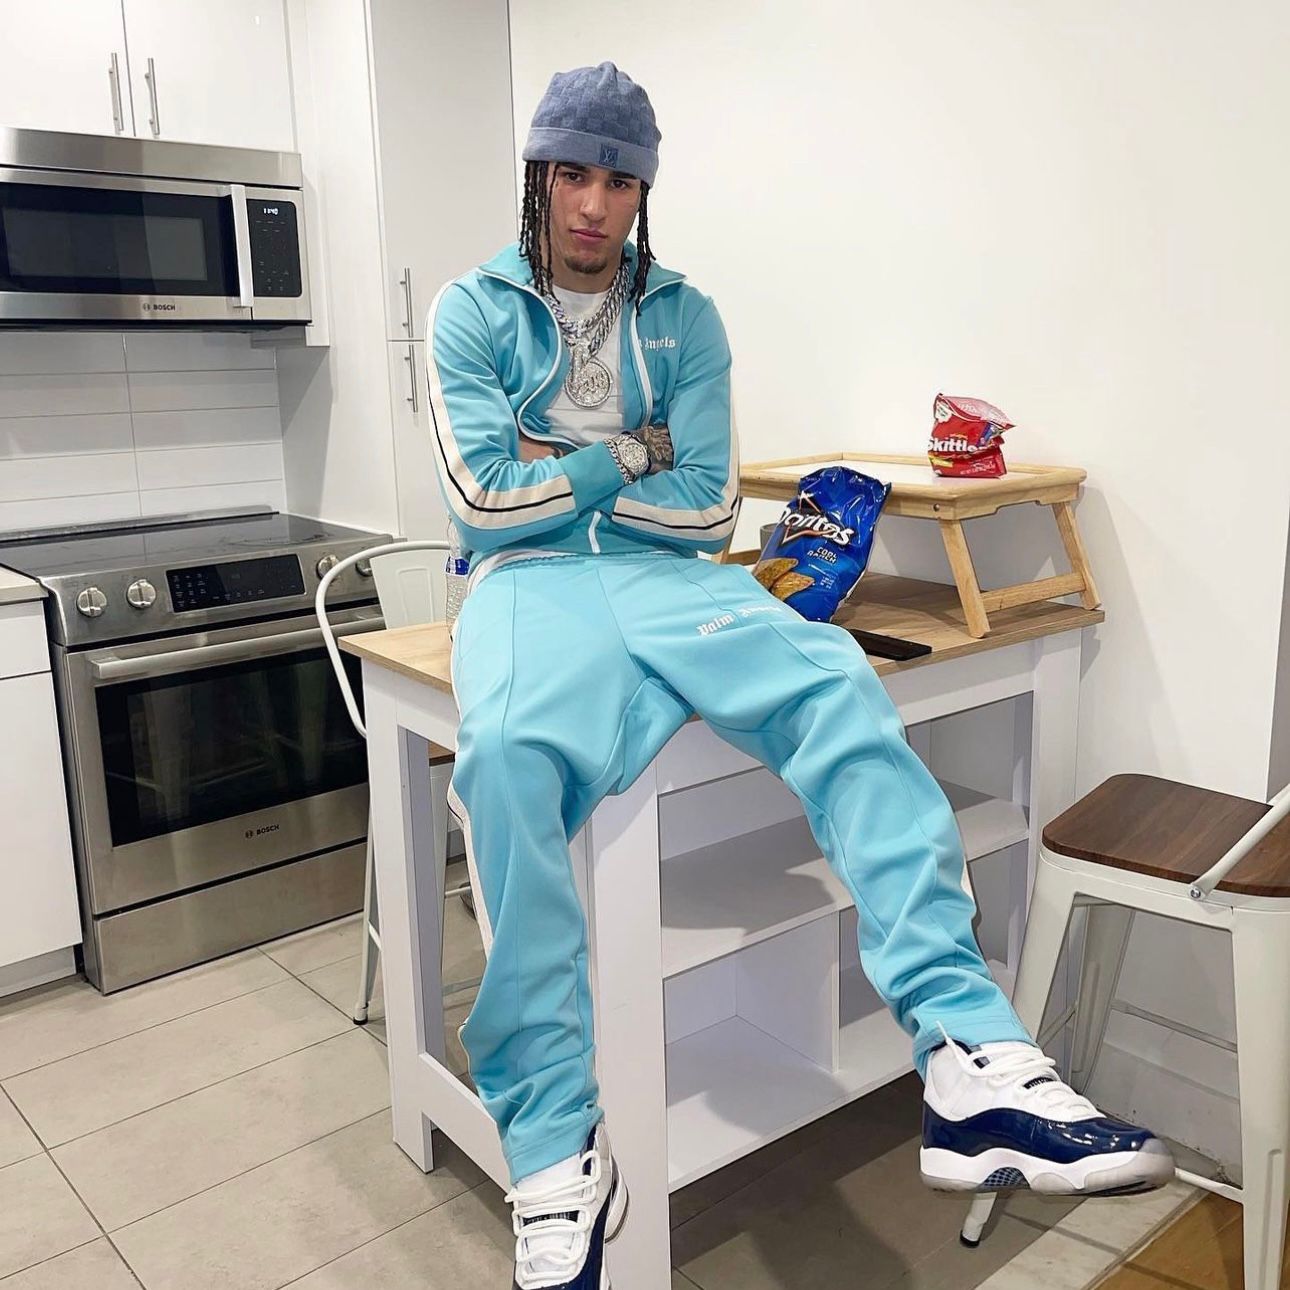 Palm Angels Tracksuit Sky Blue – REESDXB